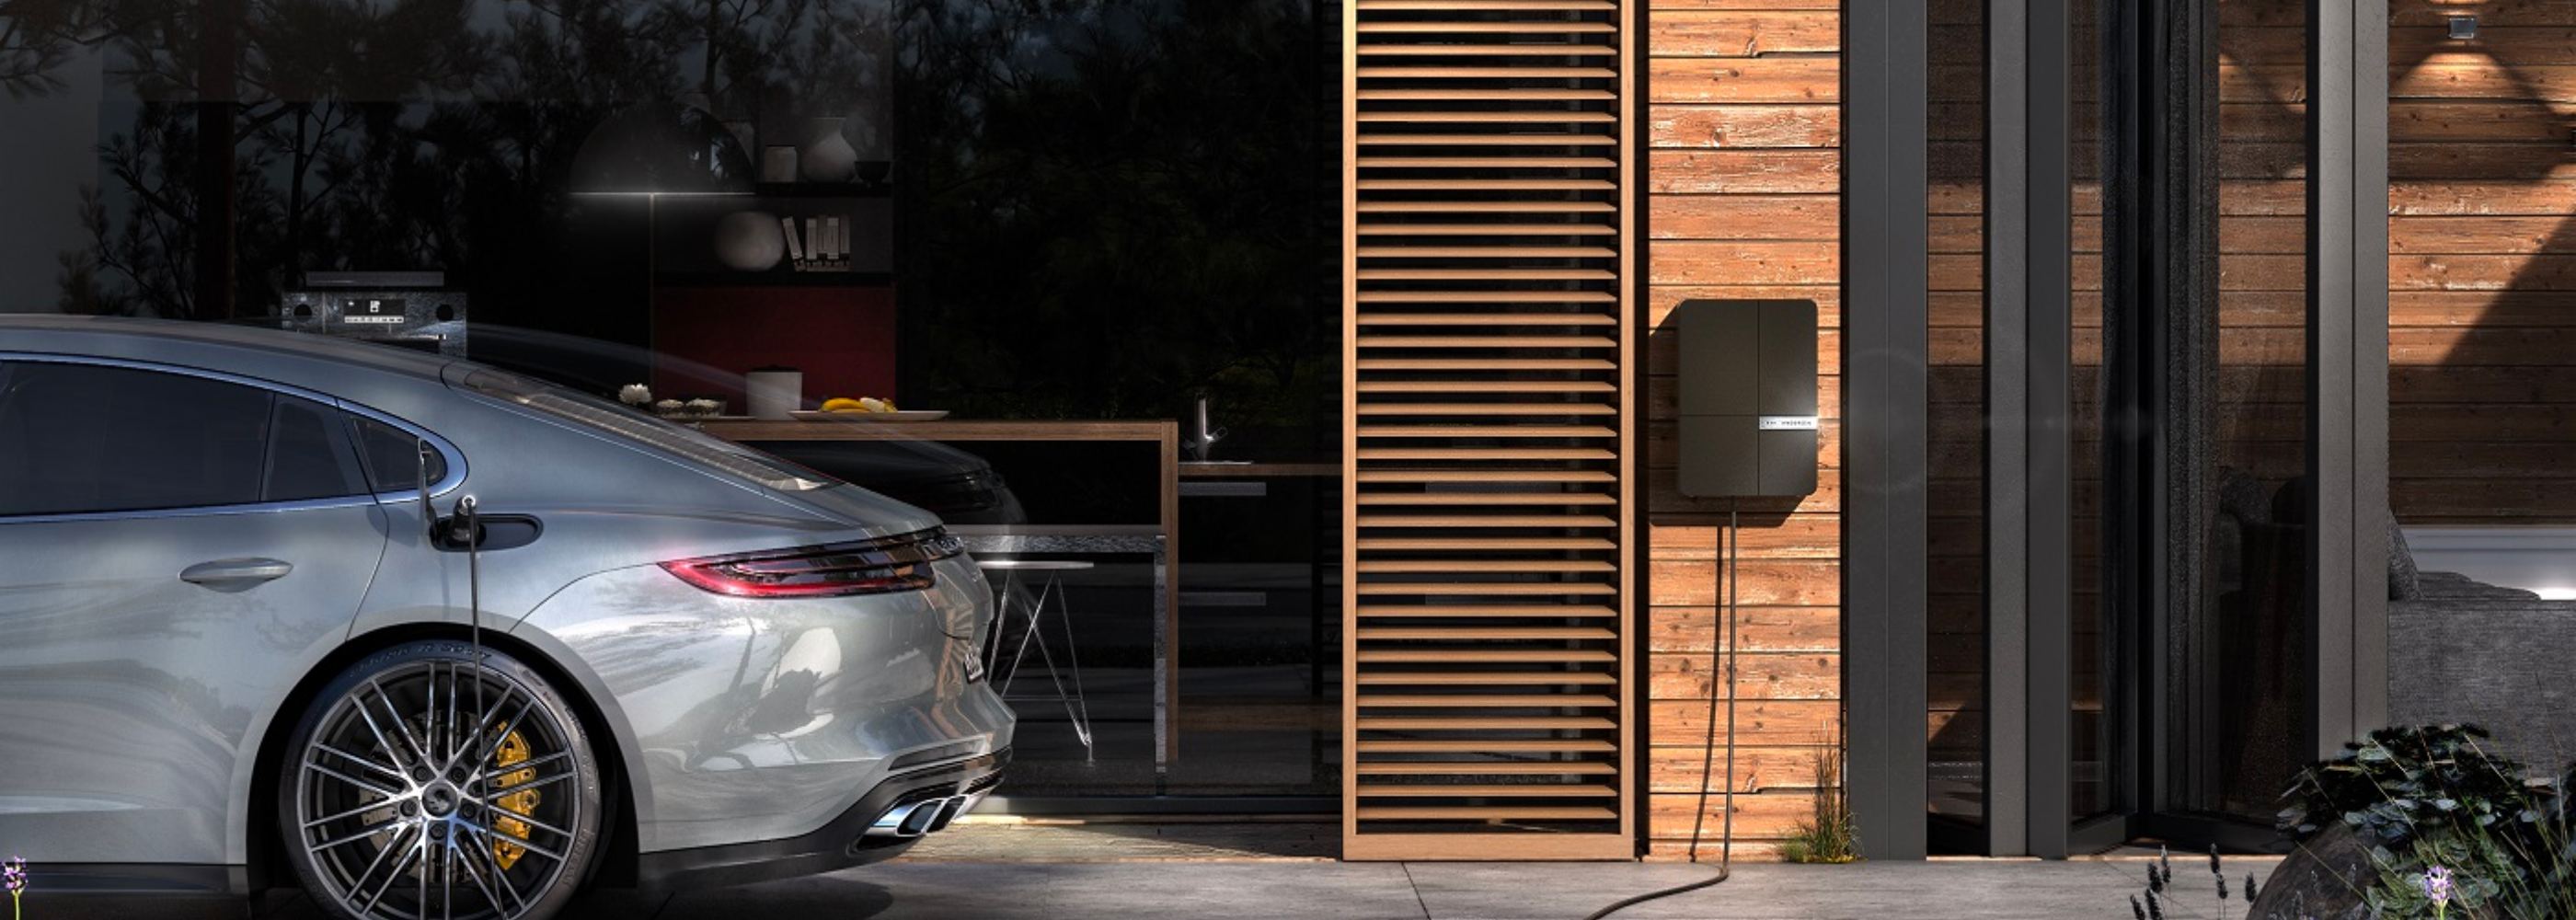 Andersen electric vehicle charger connected to car outside garage